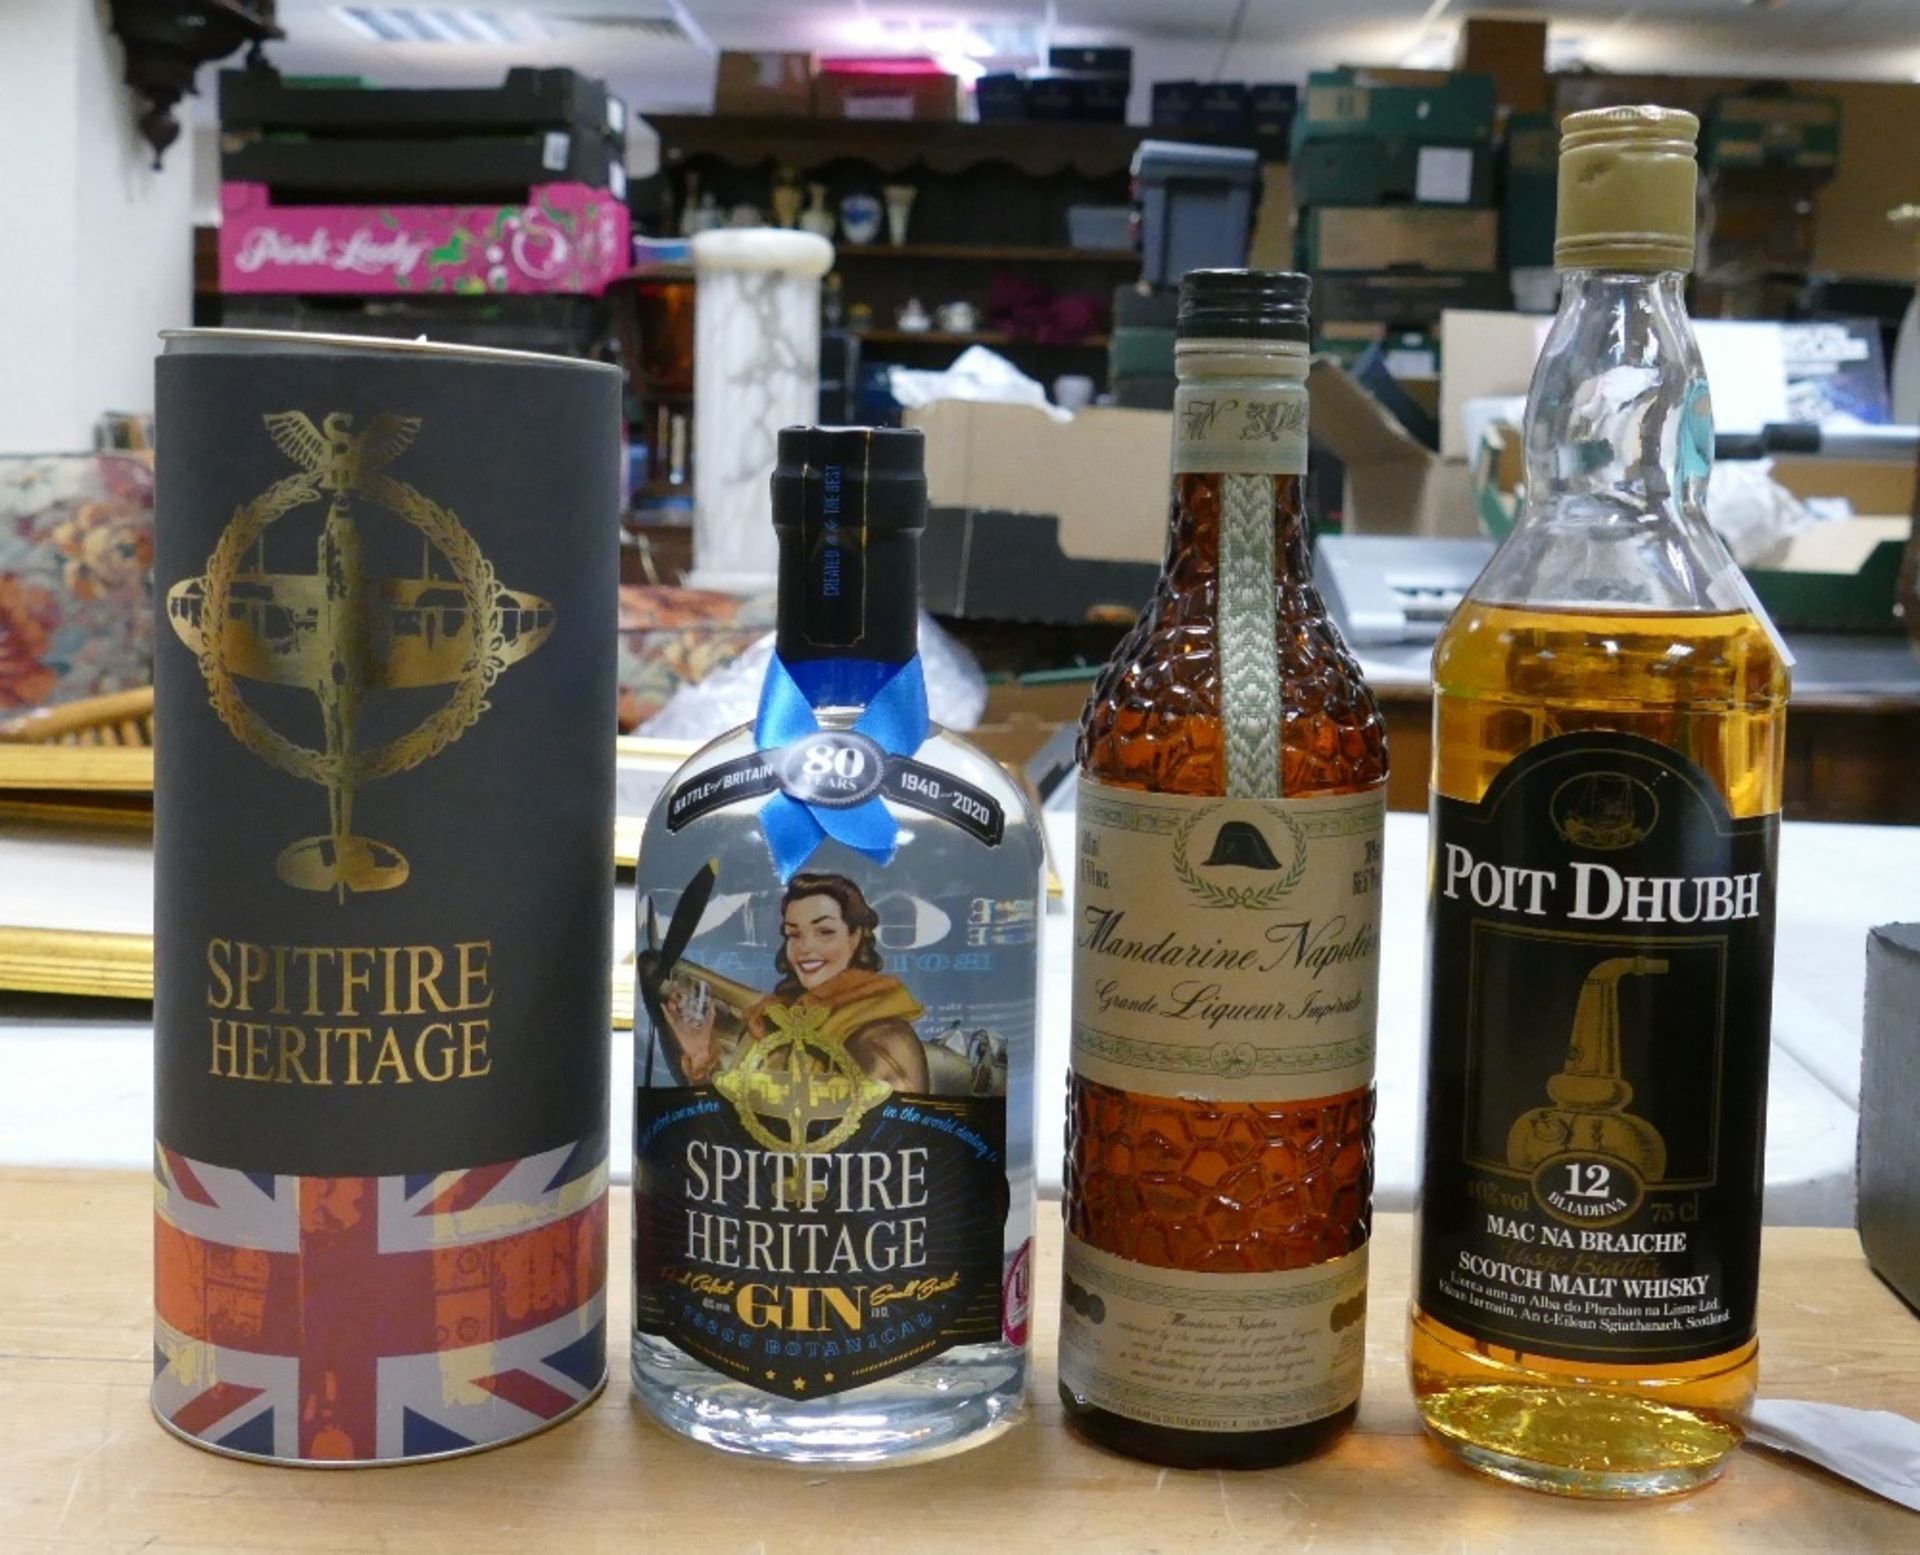 Bottle of Spitfire heritage gin in tin together with Poit Dhubh malt whiskey and Mandarine